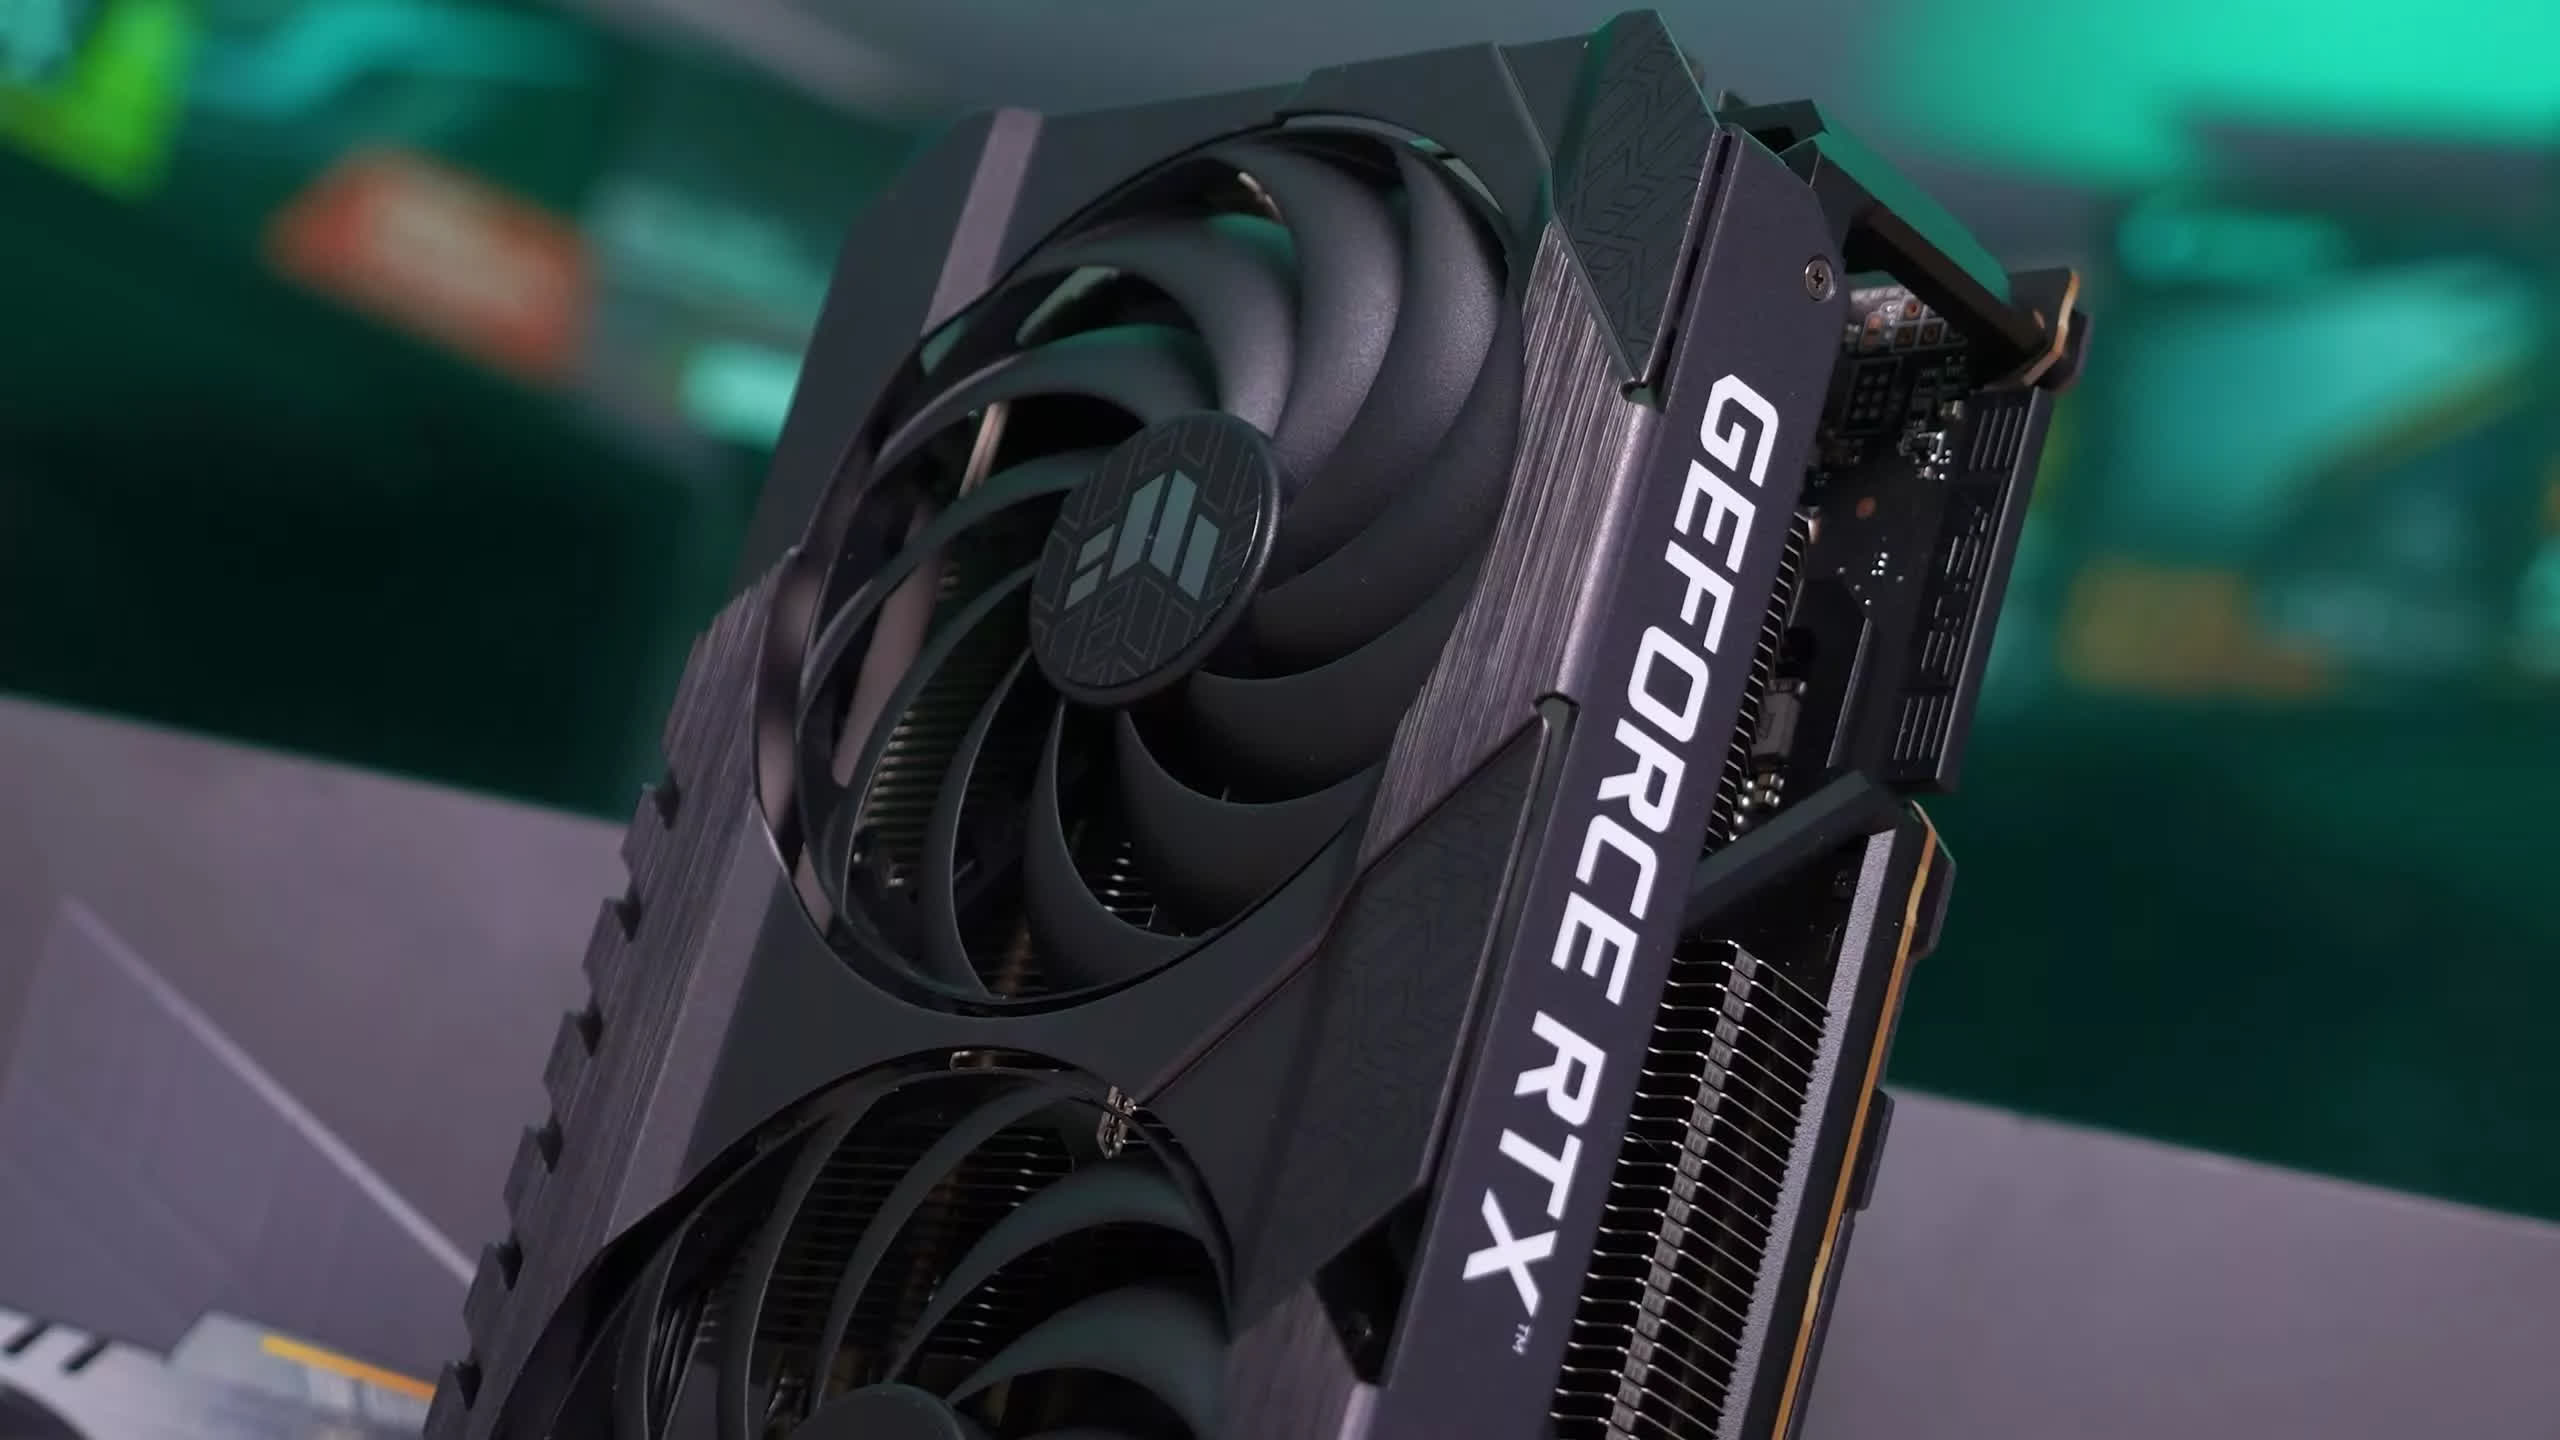 Could Nvidia delay the RTX 4000 launch until December?